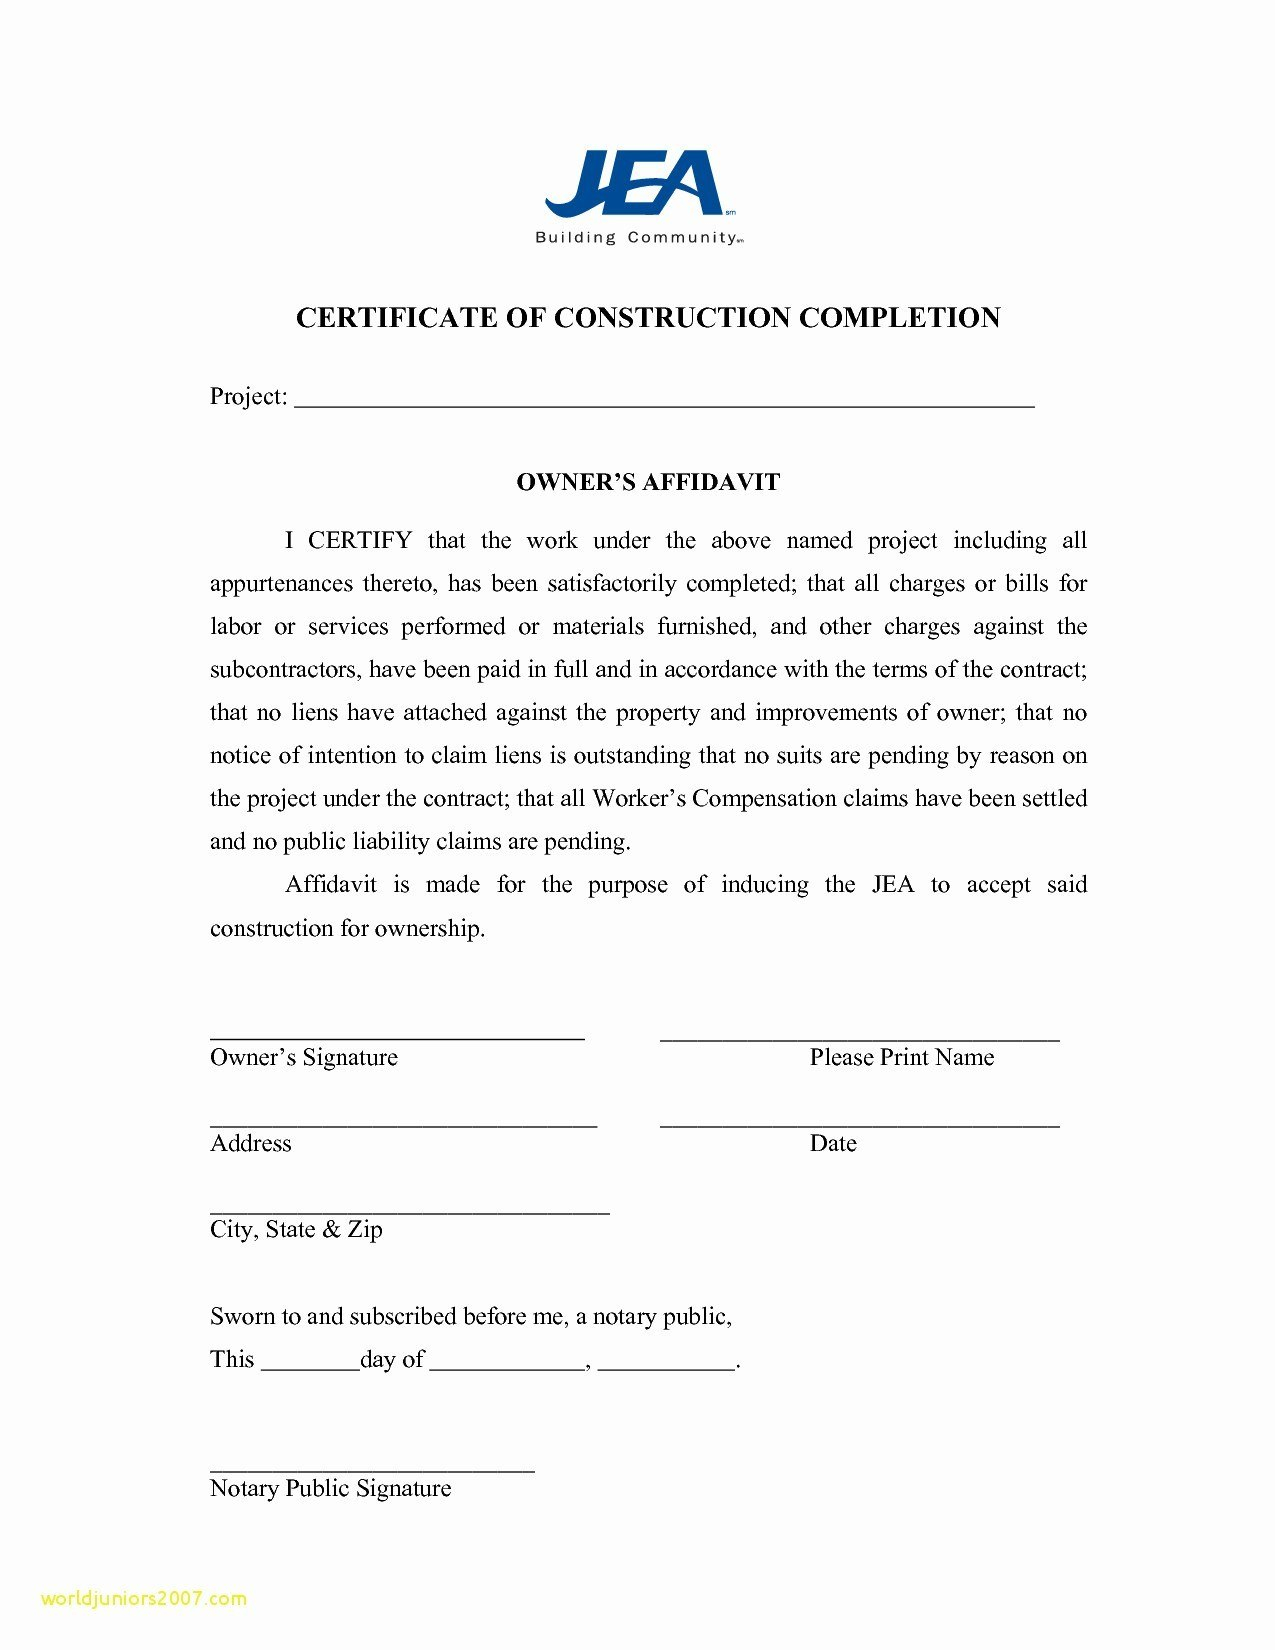 Letter Of Substantial Completion Template Examples  Letter Template in Jct Practical Completion Certificate Template